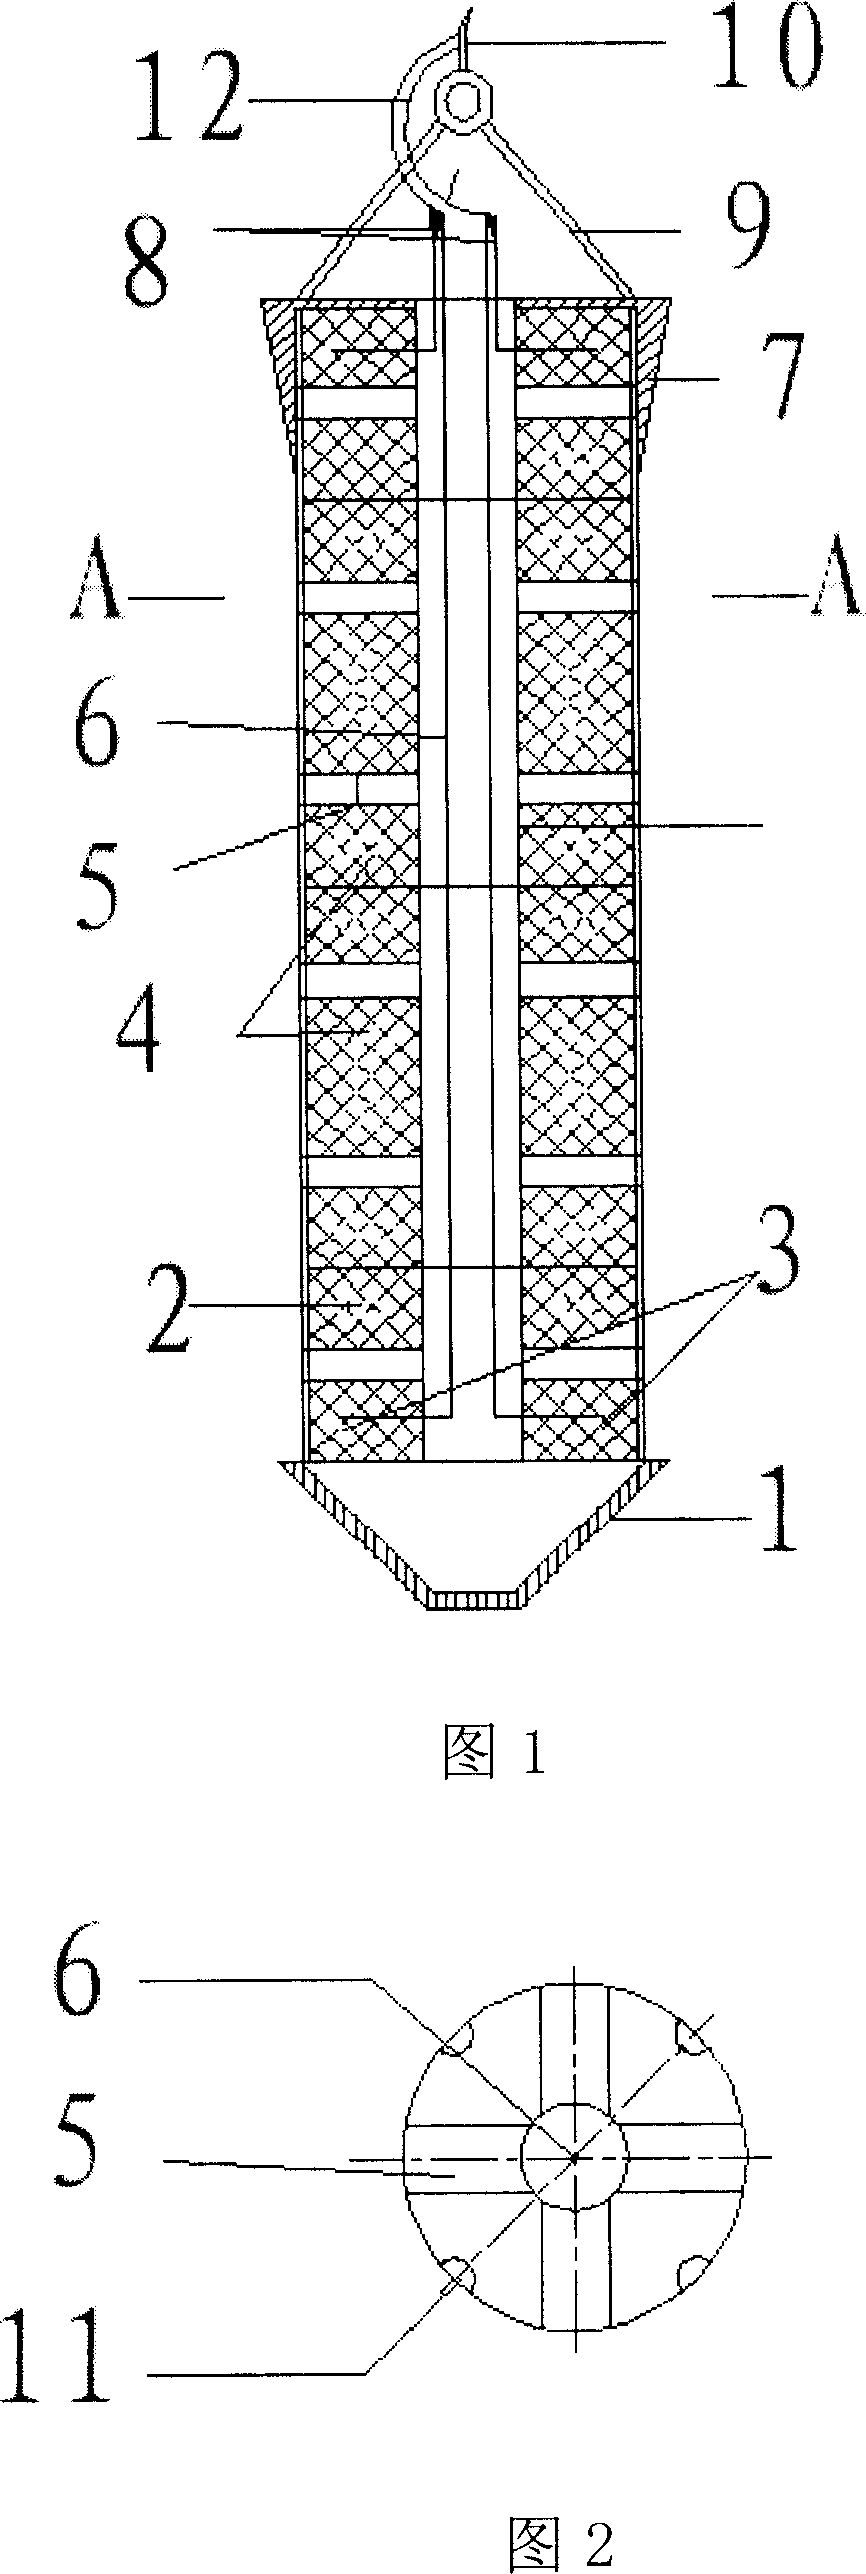 Sound wave shock and pulse combustion type pressing crack apparatus